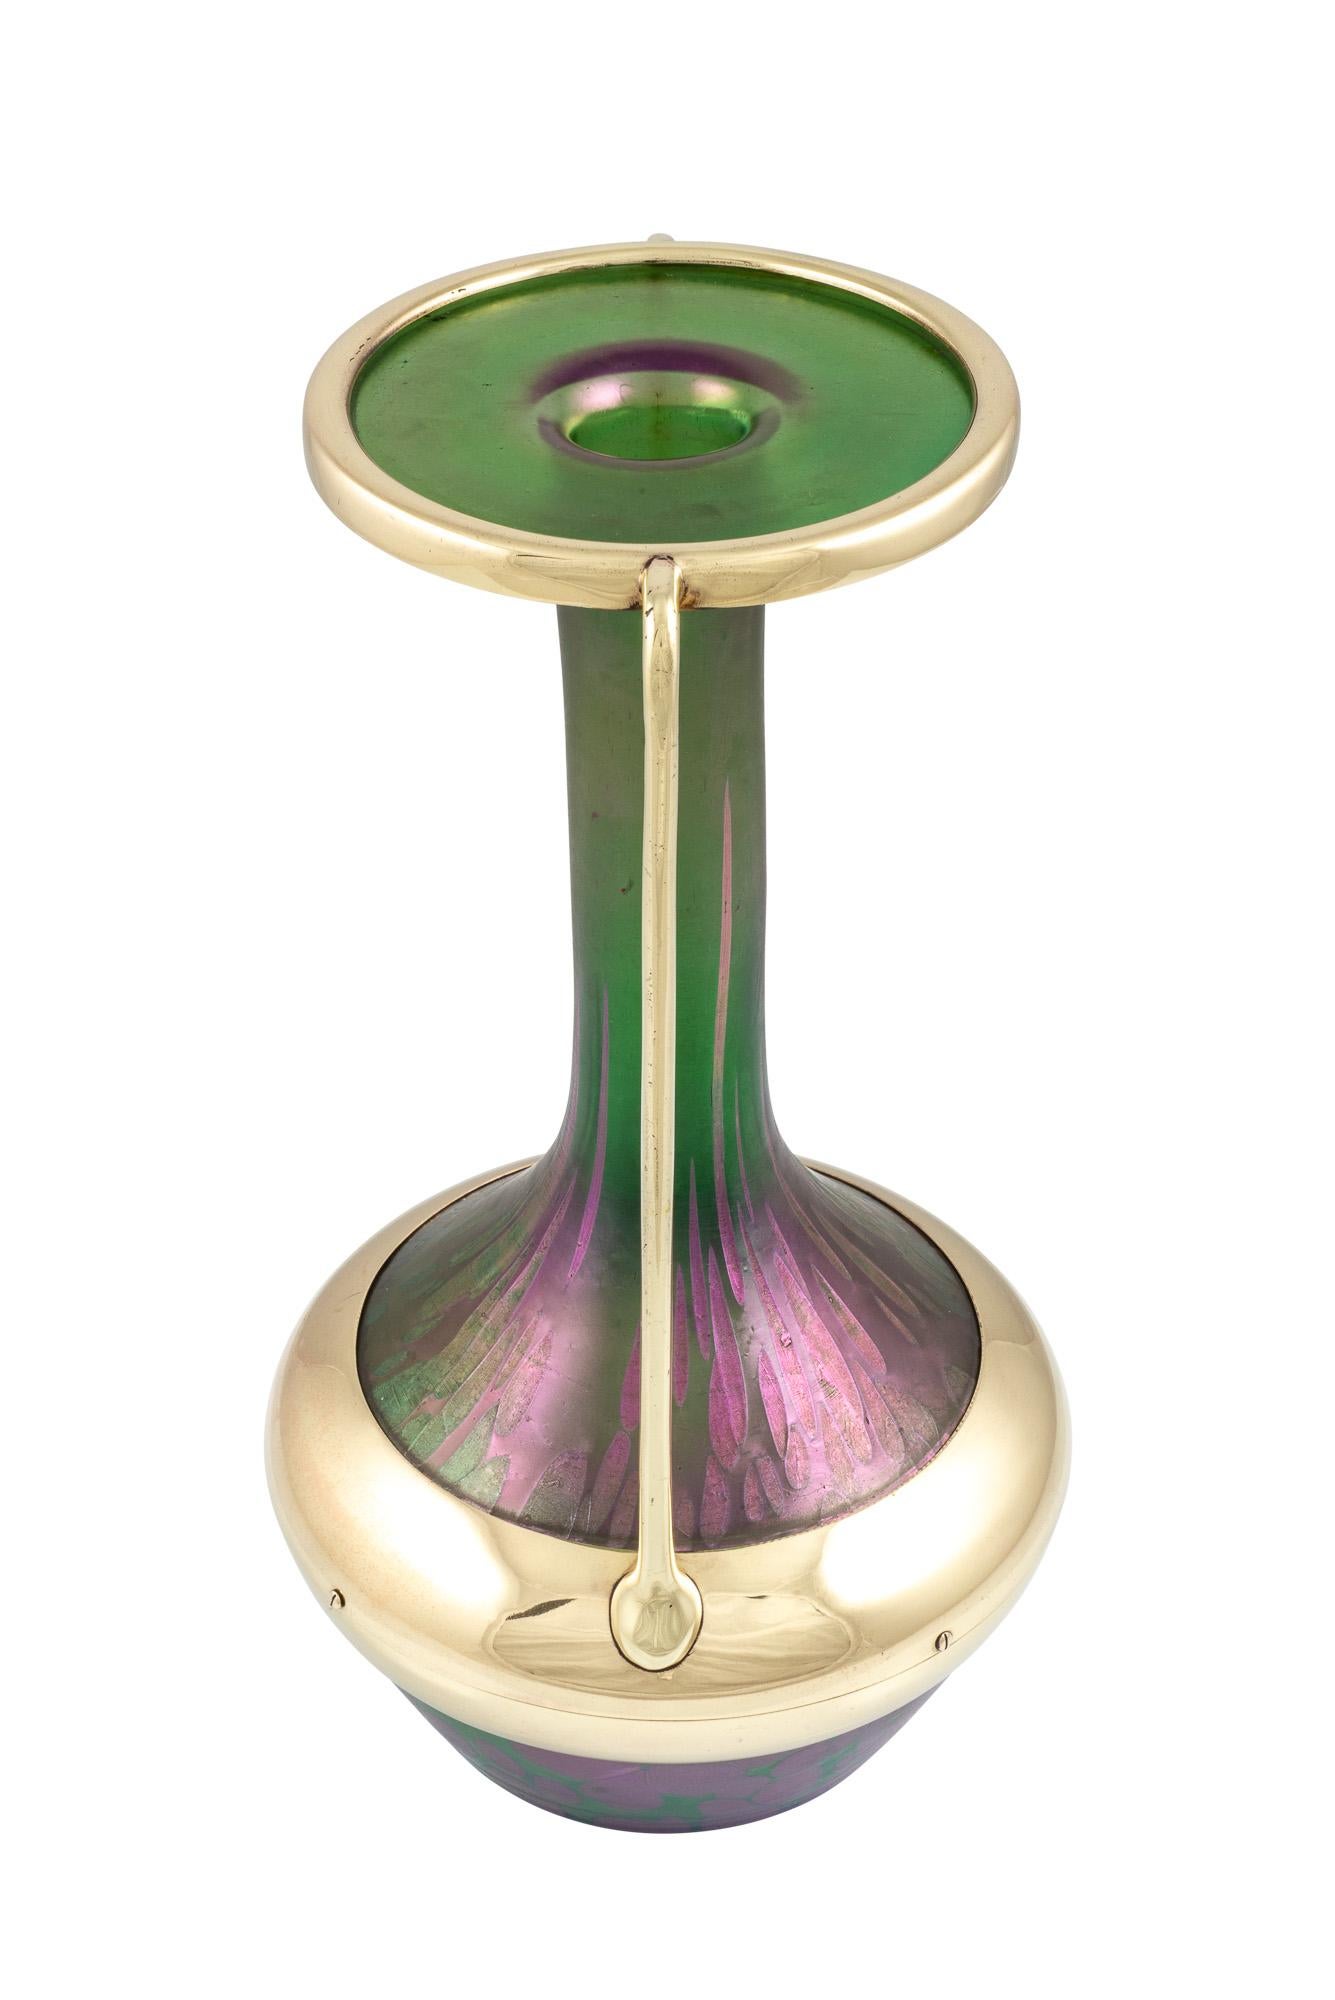 Art Nouveau Vase with a Brass Mounting Johann Loetz Witwe Decor PG 1/473, circa 1901 For Sale